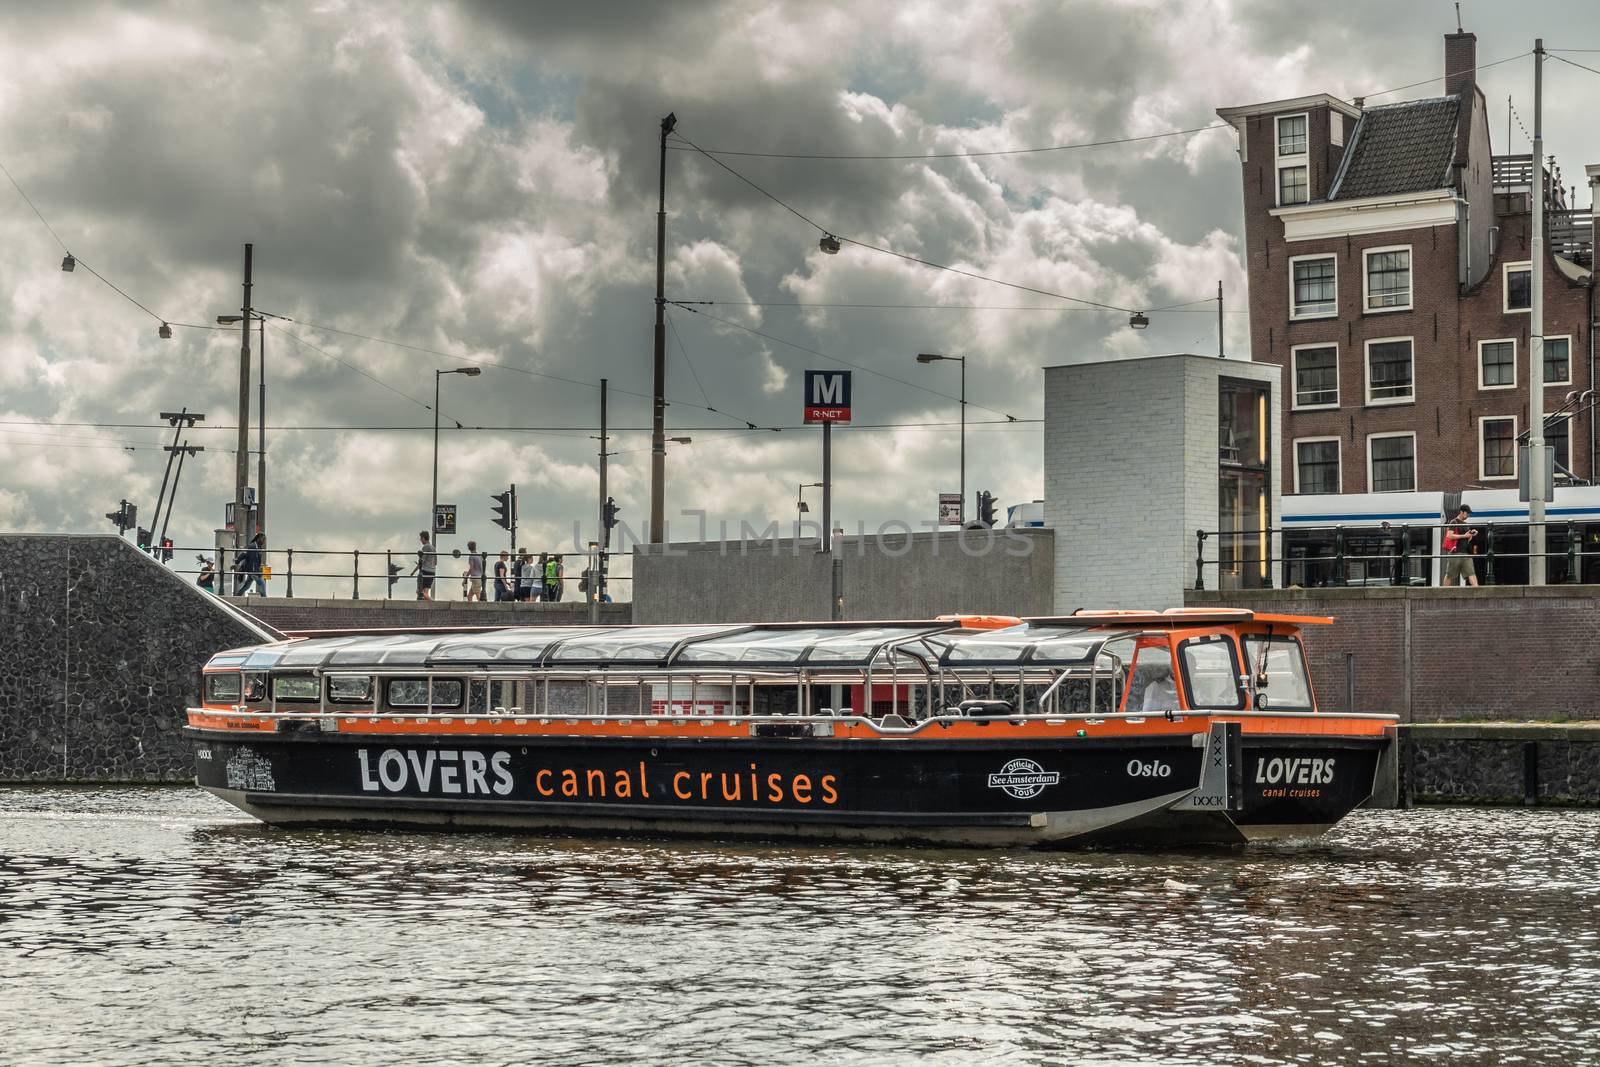 Amsterdam, the Netherlands - July 1, 2019: Lovers Canal Cruises boat on the move in canal under heavy cloudscape on top of dark water. Street with houses and people in back.